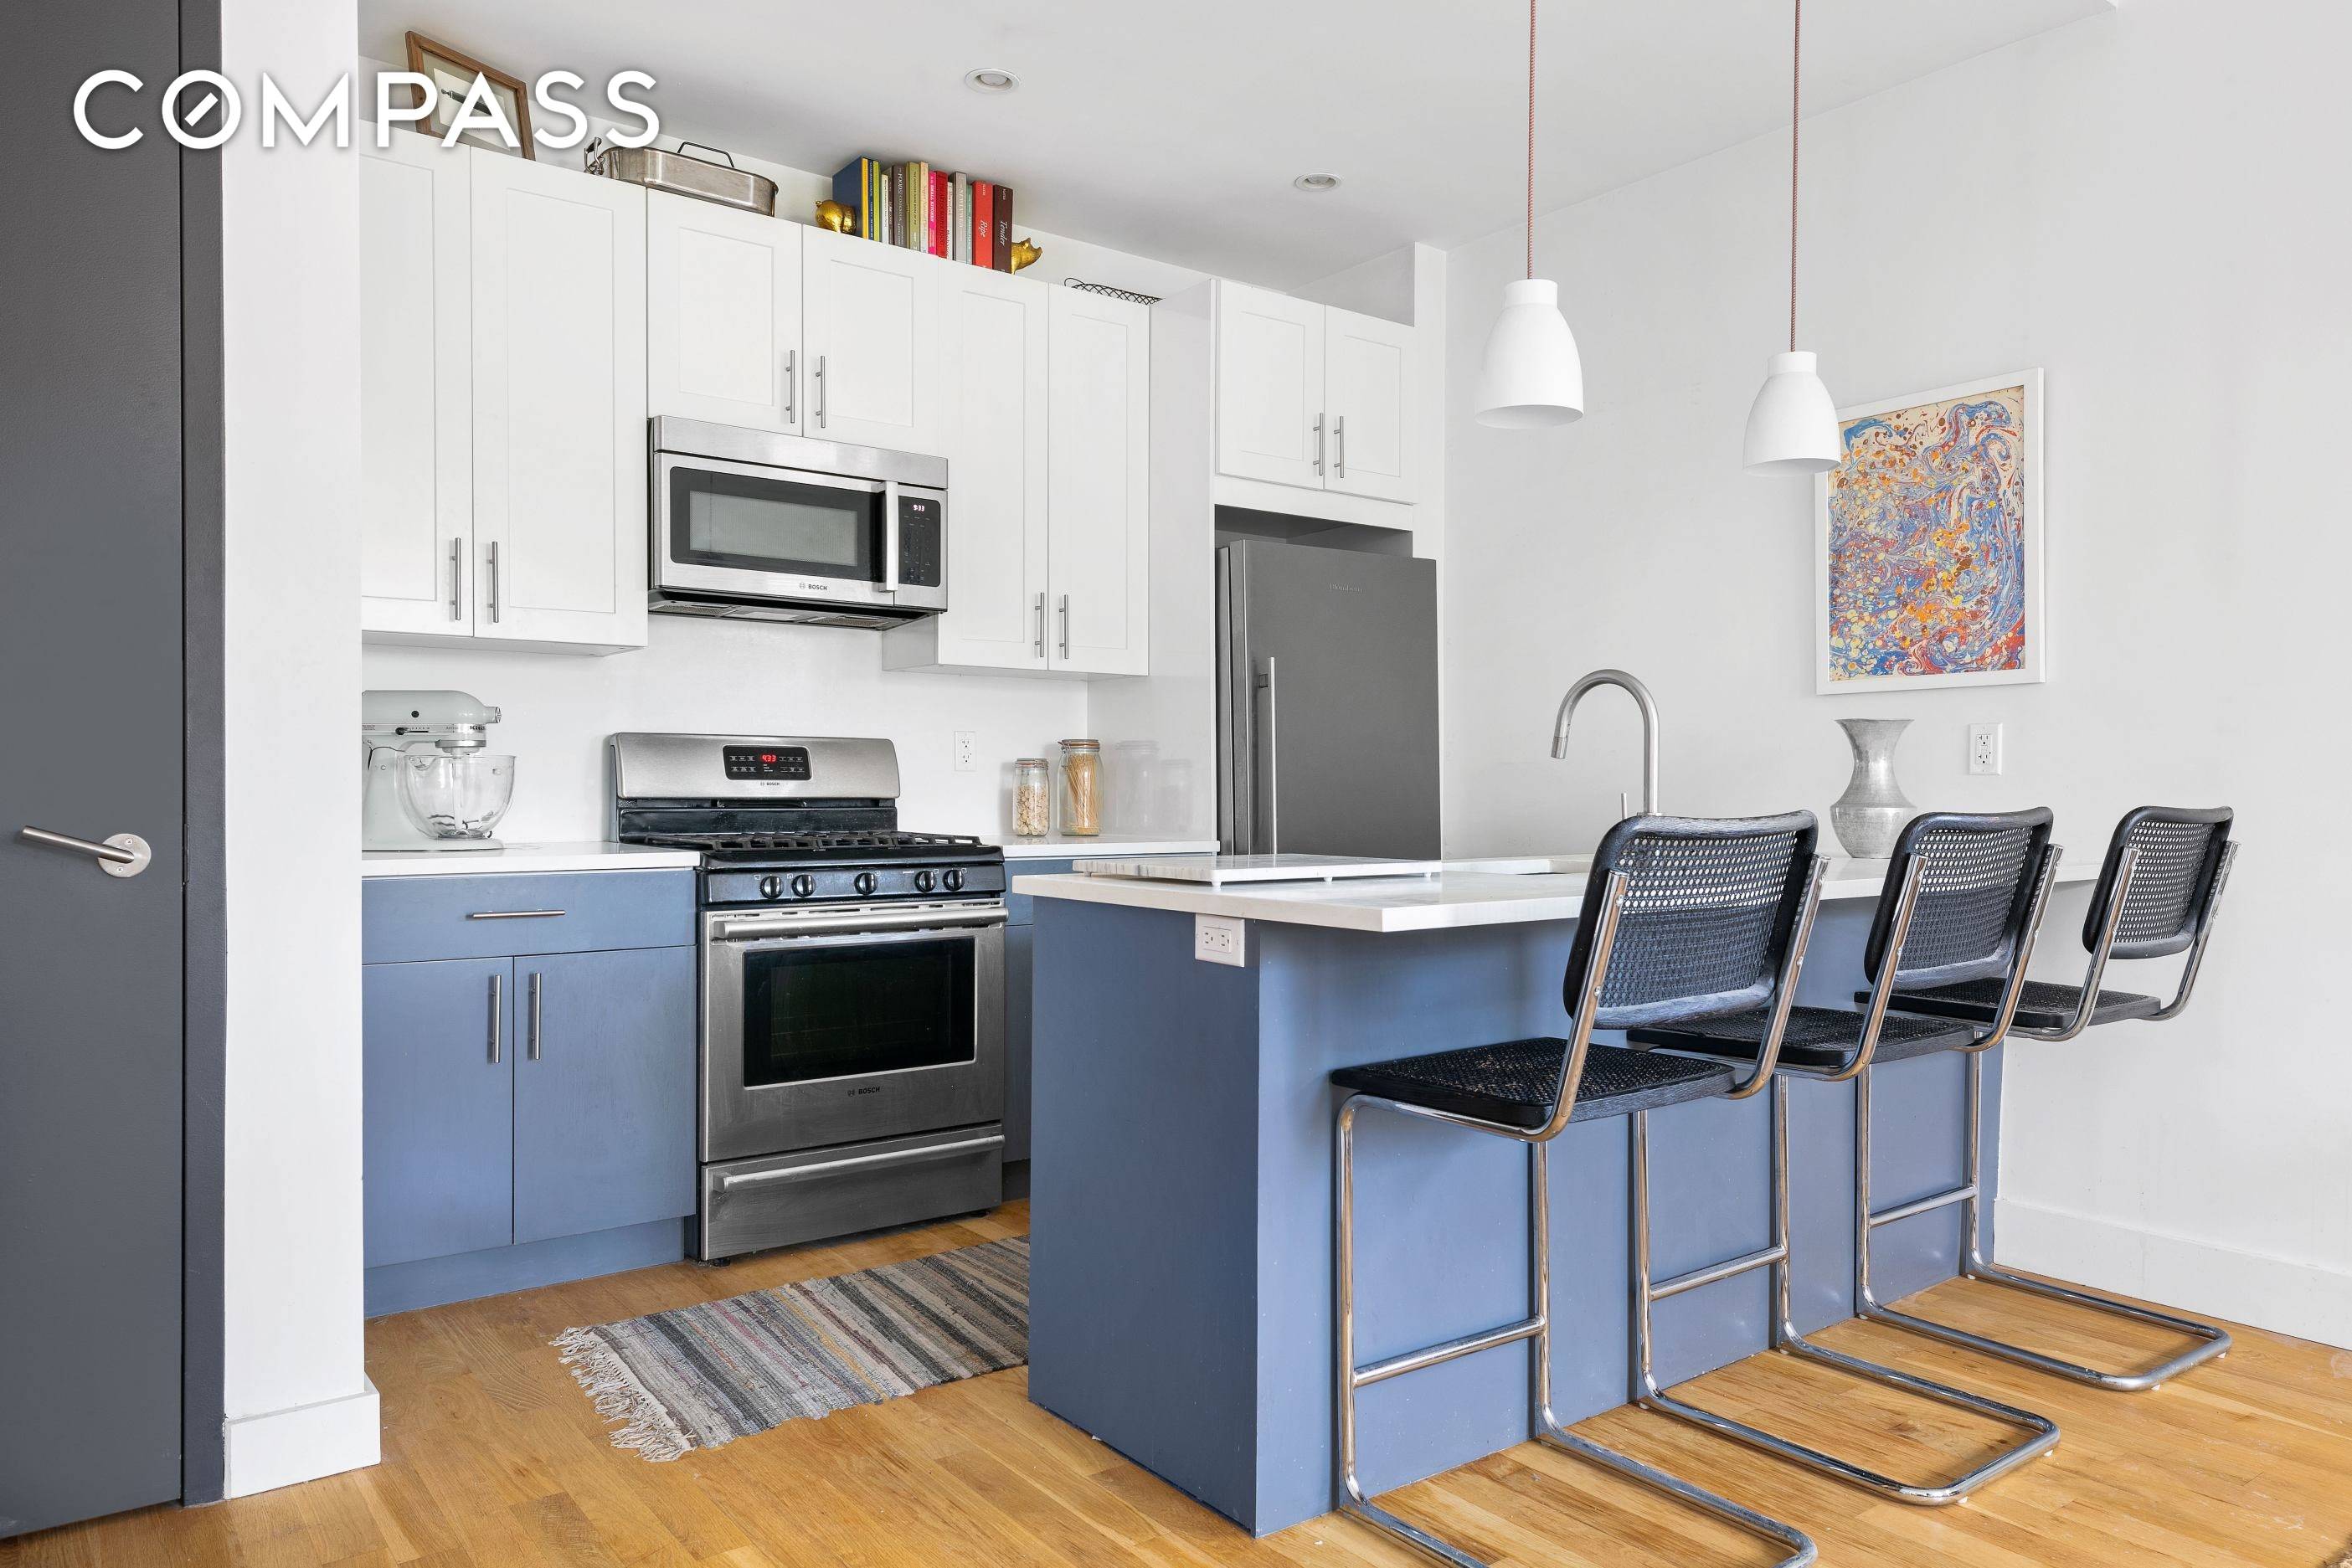 Built in 2015, 629 Grand Street is a luxurious condo oasis in the heart of Williamsburg with extremely low common charges and 0 taxes.